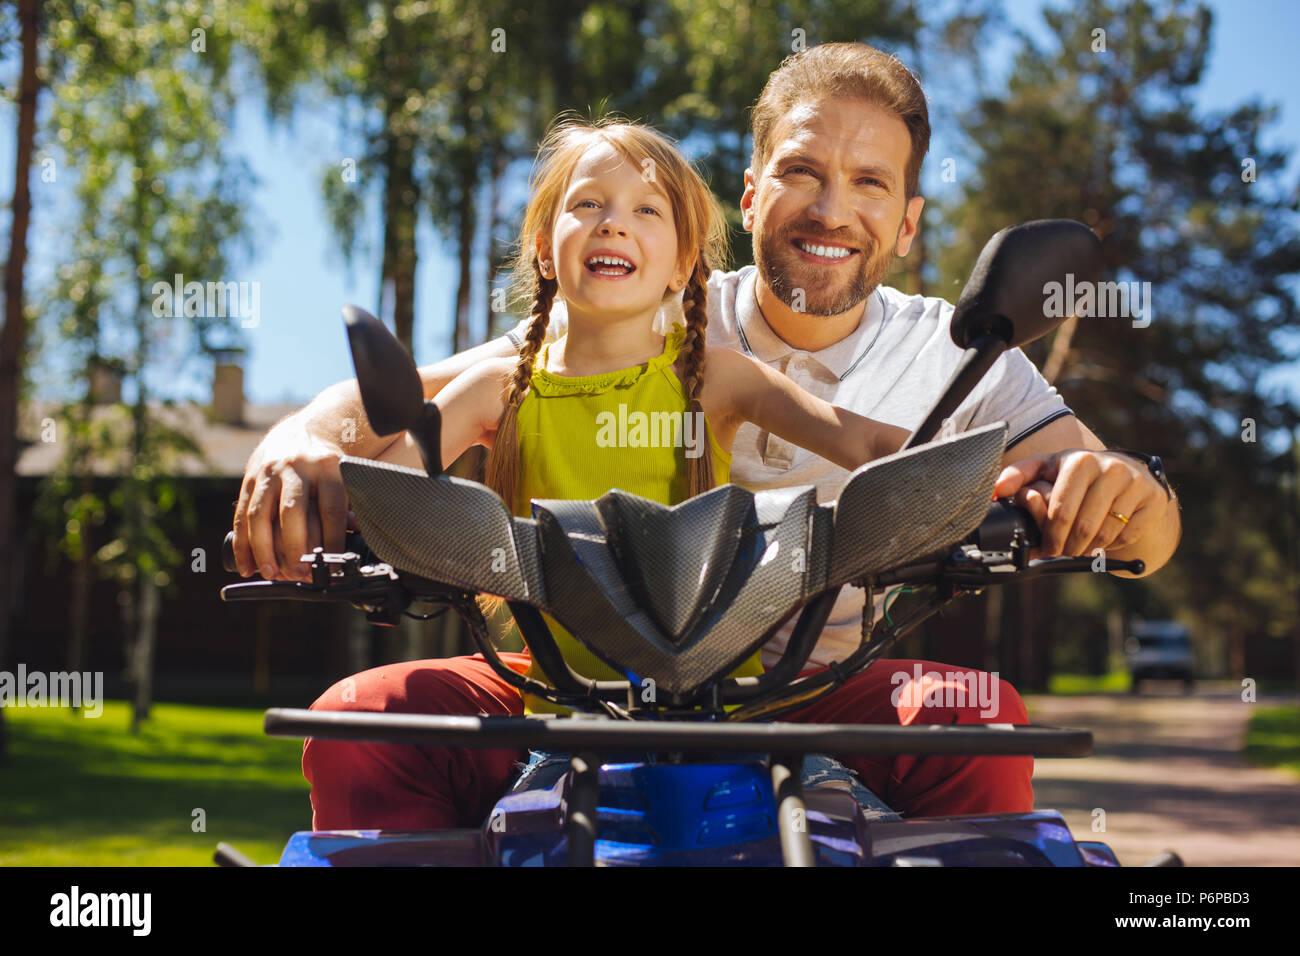 Smiling girl driving ATV with her daddy Stock Photo